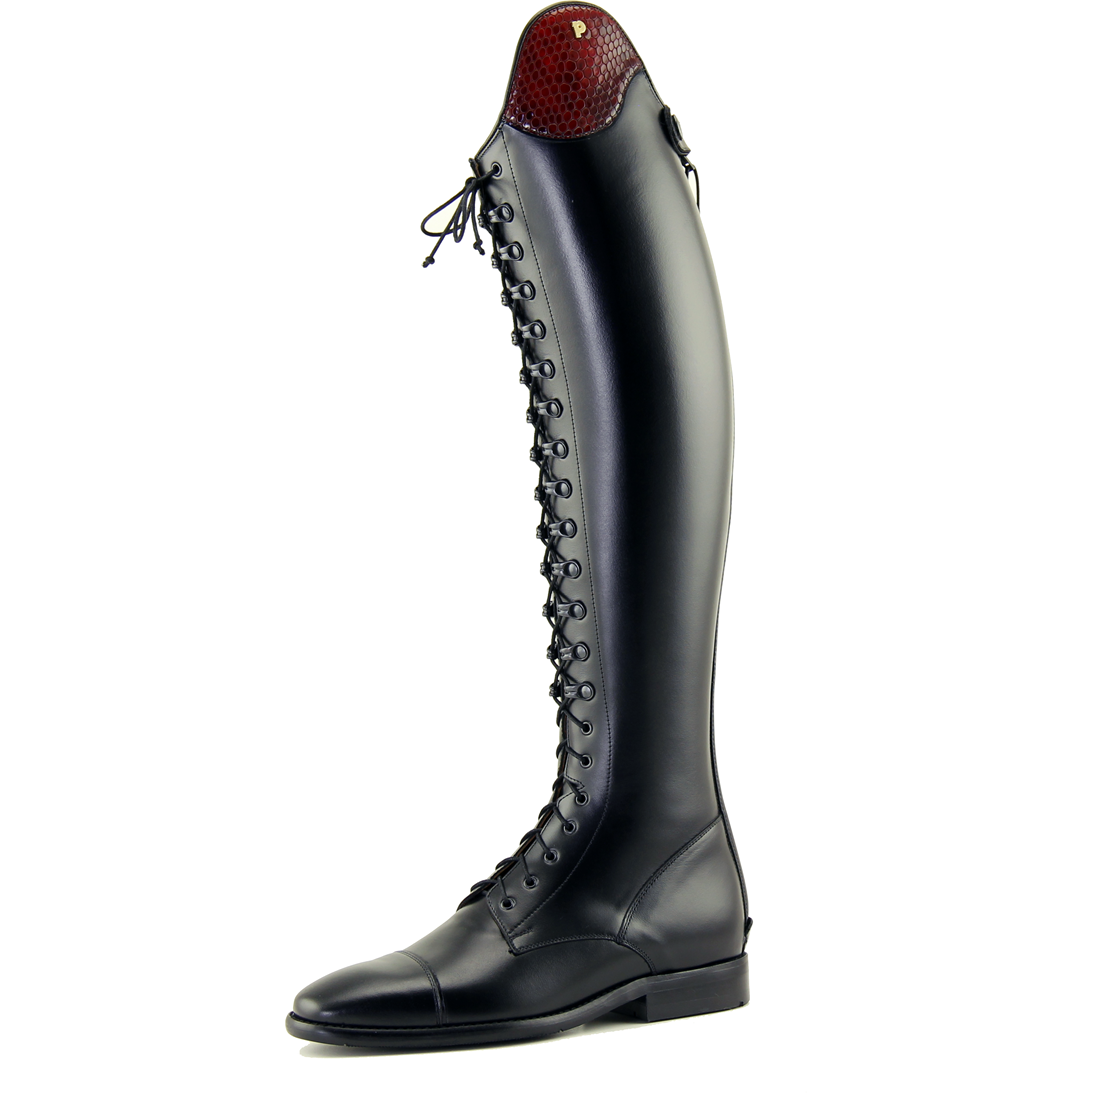 Petrie Rimini Boot - we have some stock but most sizes are to order